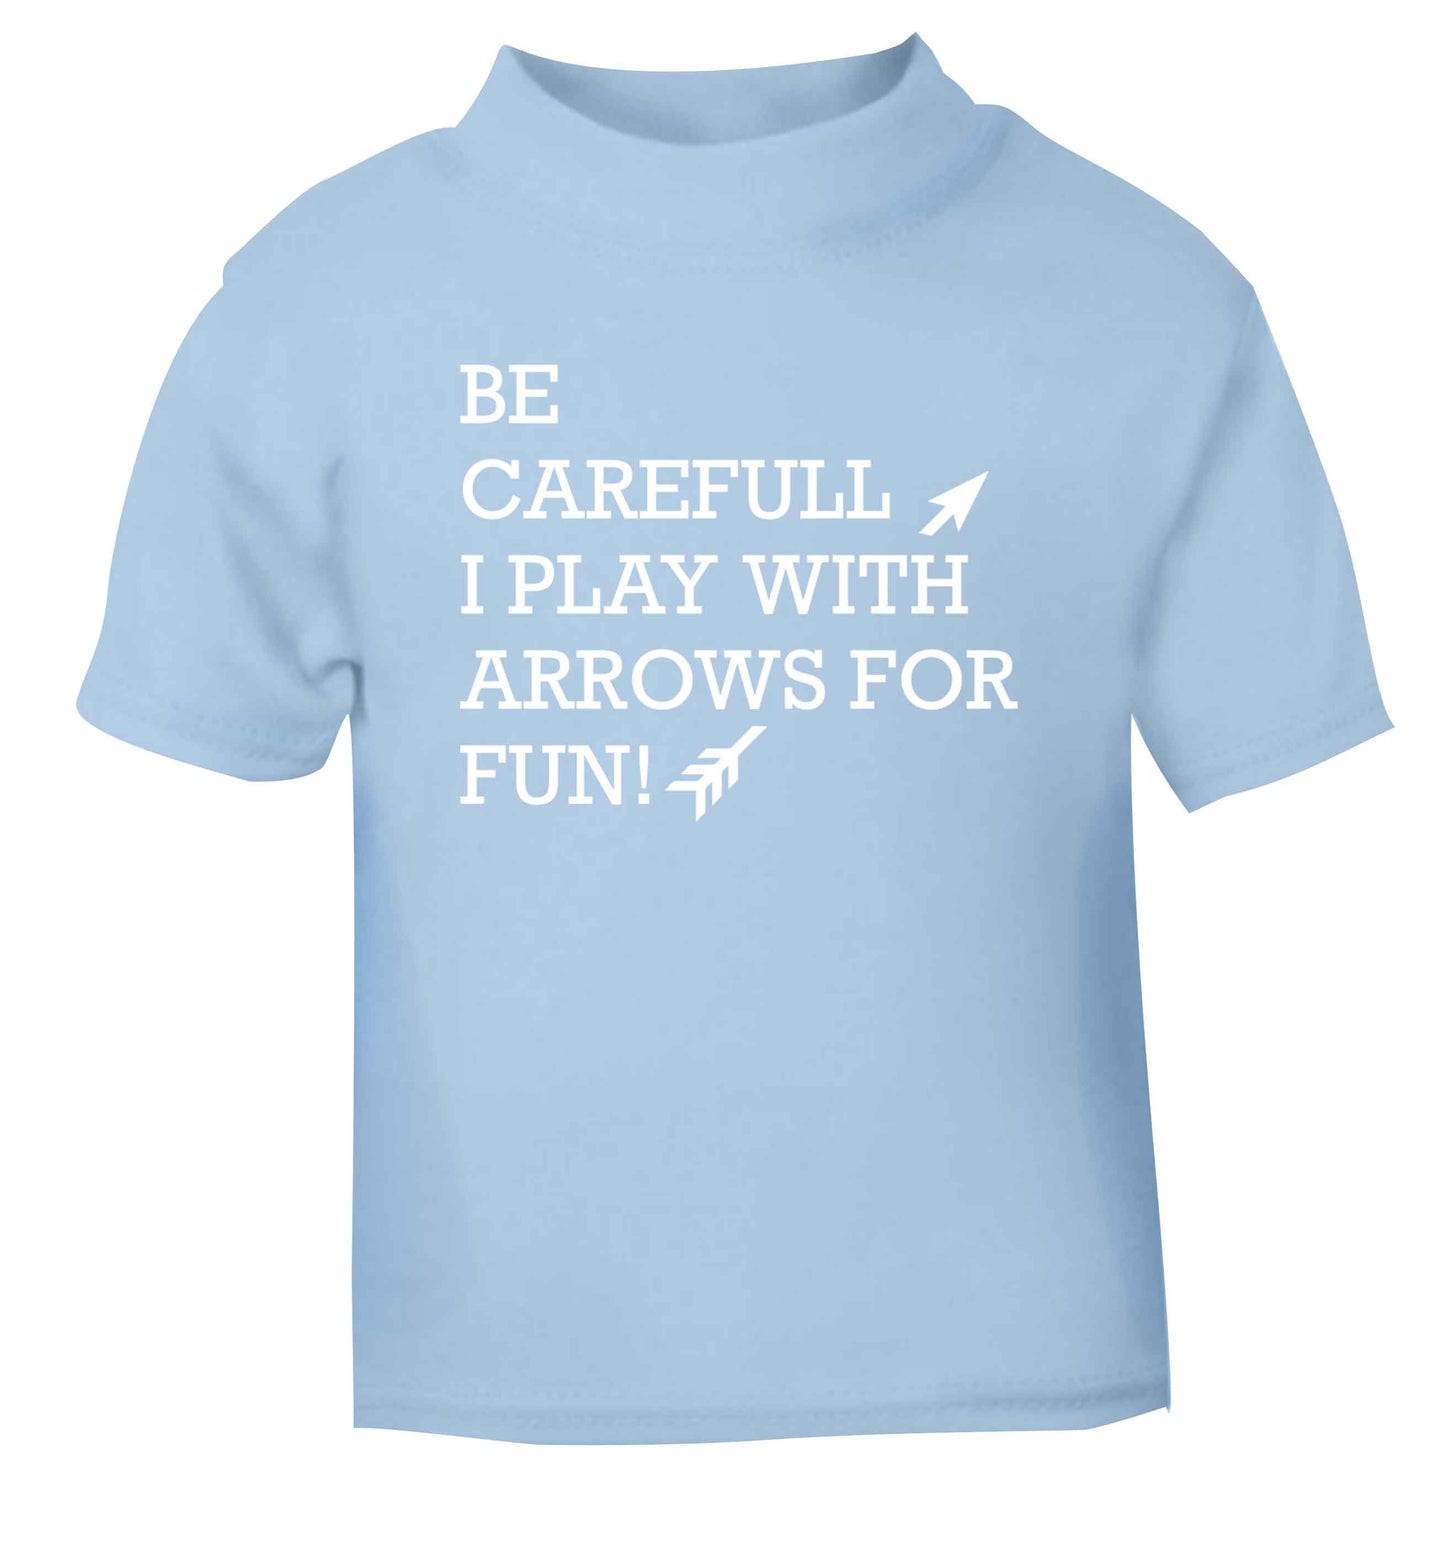 Be carefull I play with arrows for fun light blue Baby Toddler Tshirt 2 Years